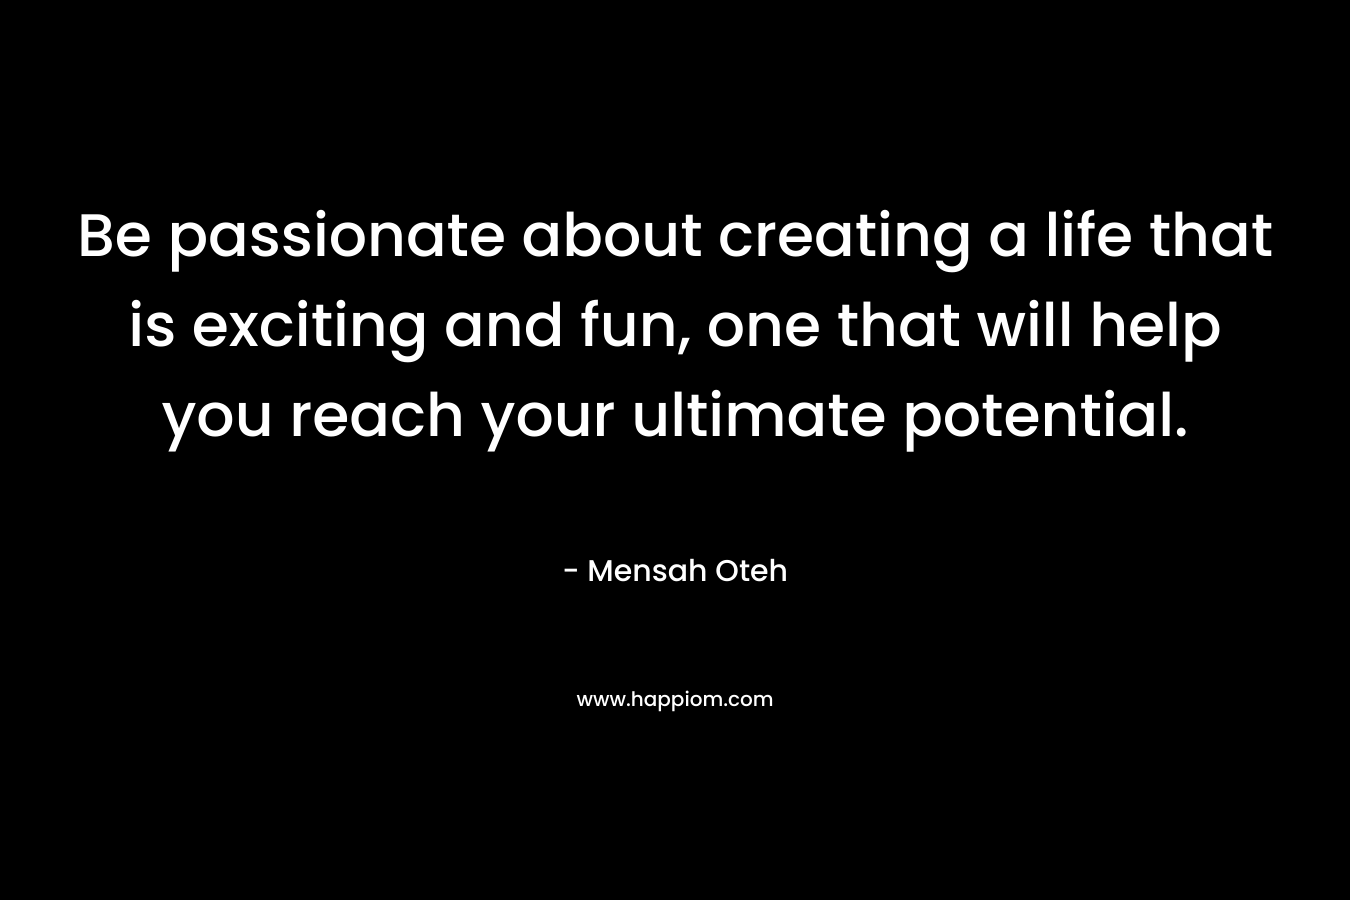 Be passionate about creating a life that is exciting and fun, one that will help you reach your ultimate potential.